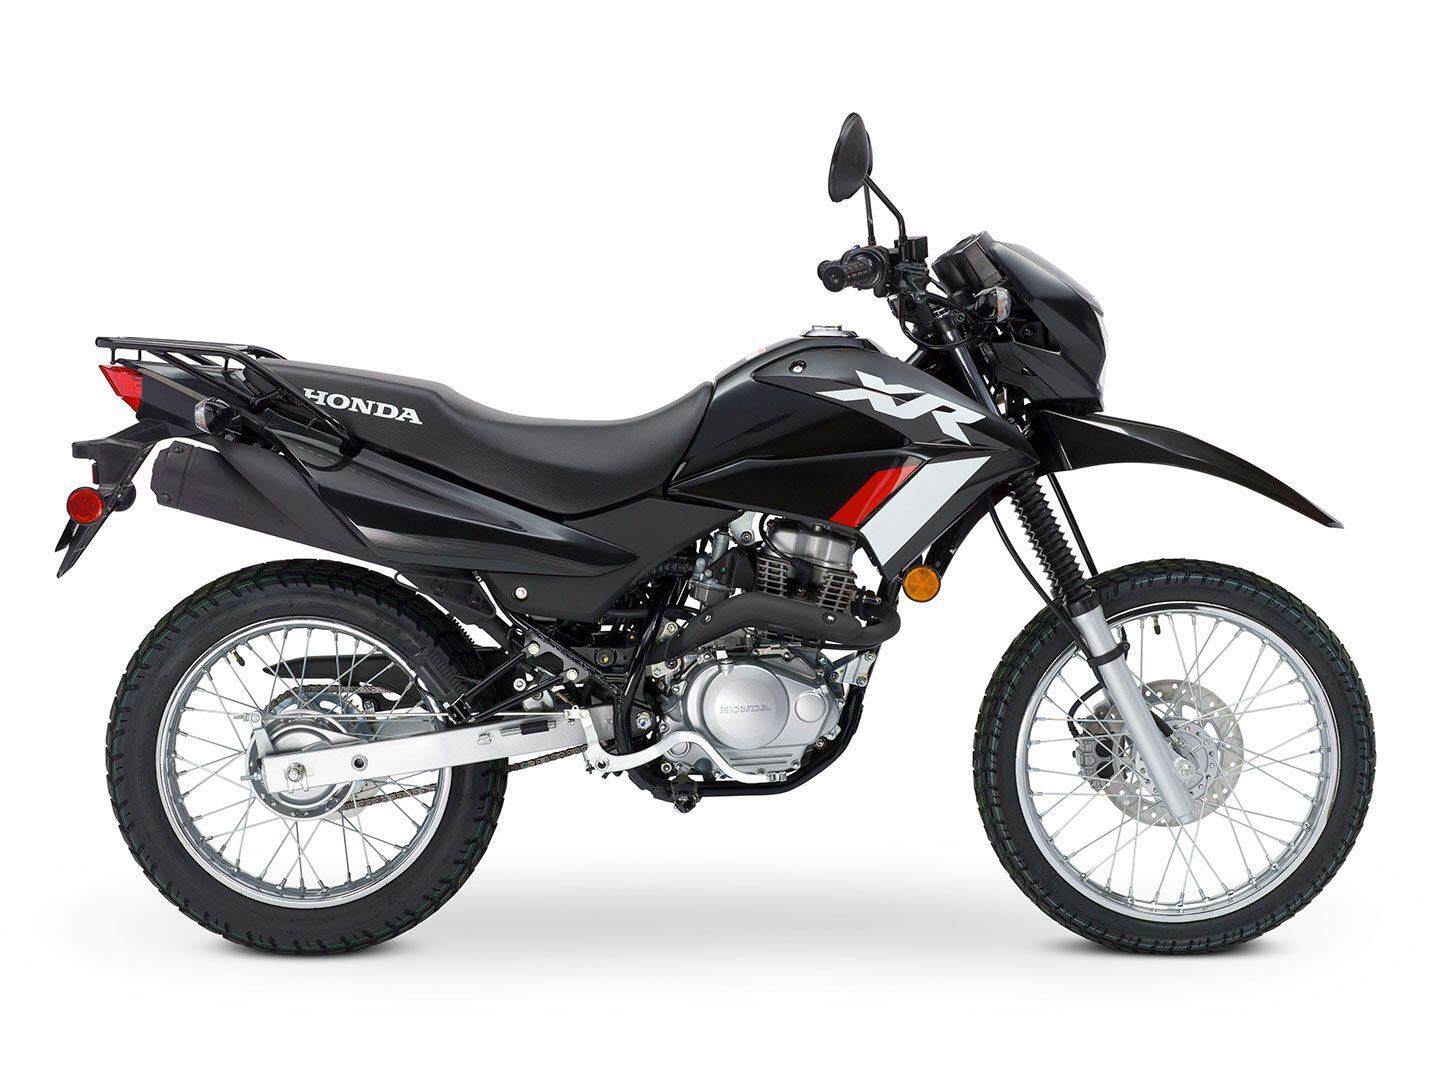 The 2023 Honda XR150L is a fuel-sipping, beginner-friendly dual sport powered by a bulletproof 149cc air-cooled single-cylinder engine. For shorter and inexperienced riders who want to ride from home to trail, the XR is an open door to adventure. At $2,971, it’s a door that’s wide open.